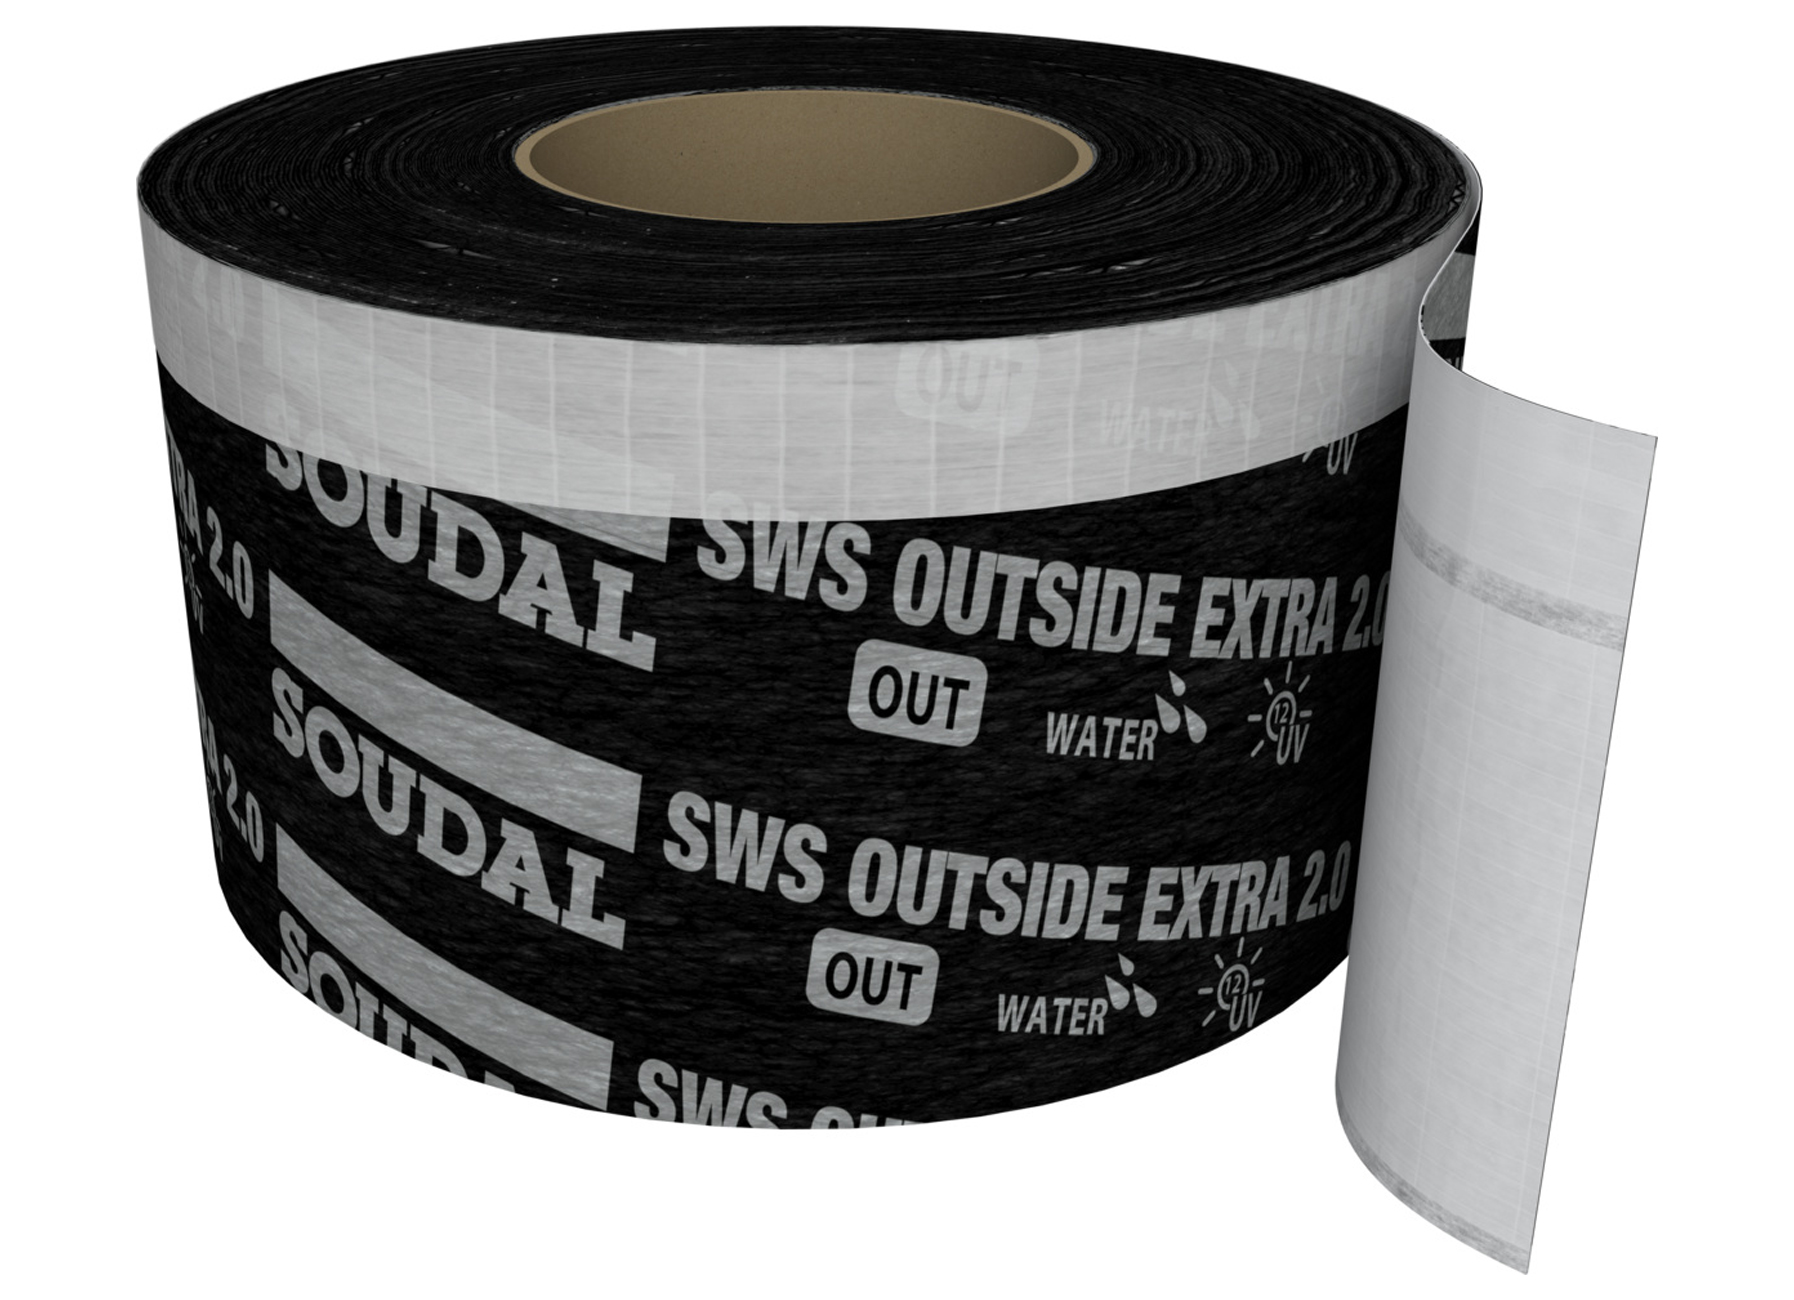 SOUDAL SWS OUTSIDE EXTRA 2.0 200MM